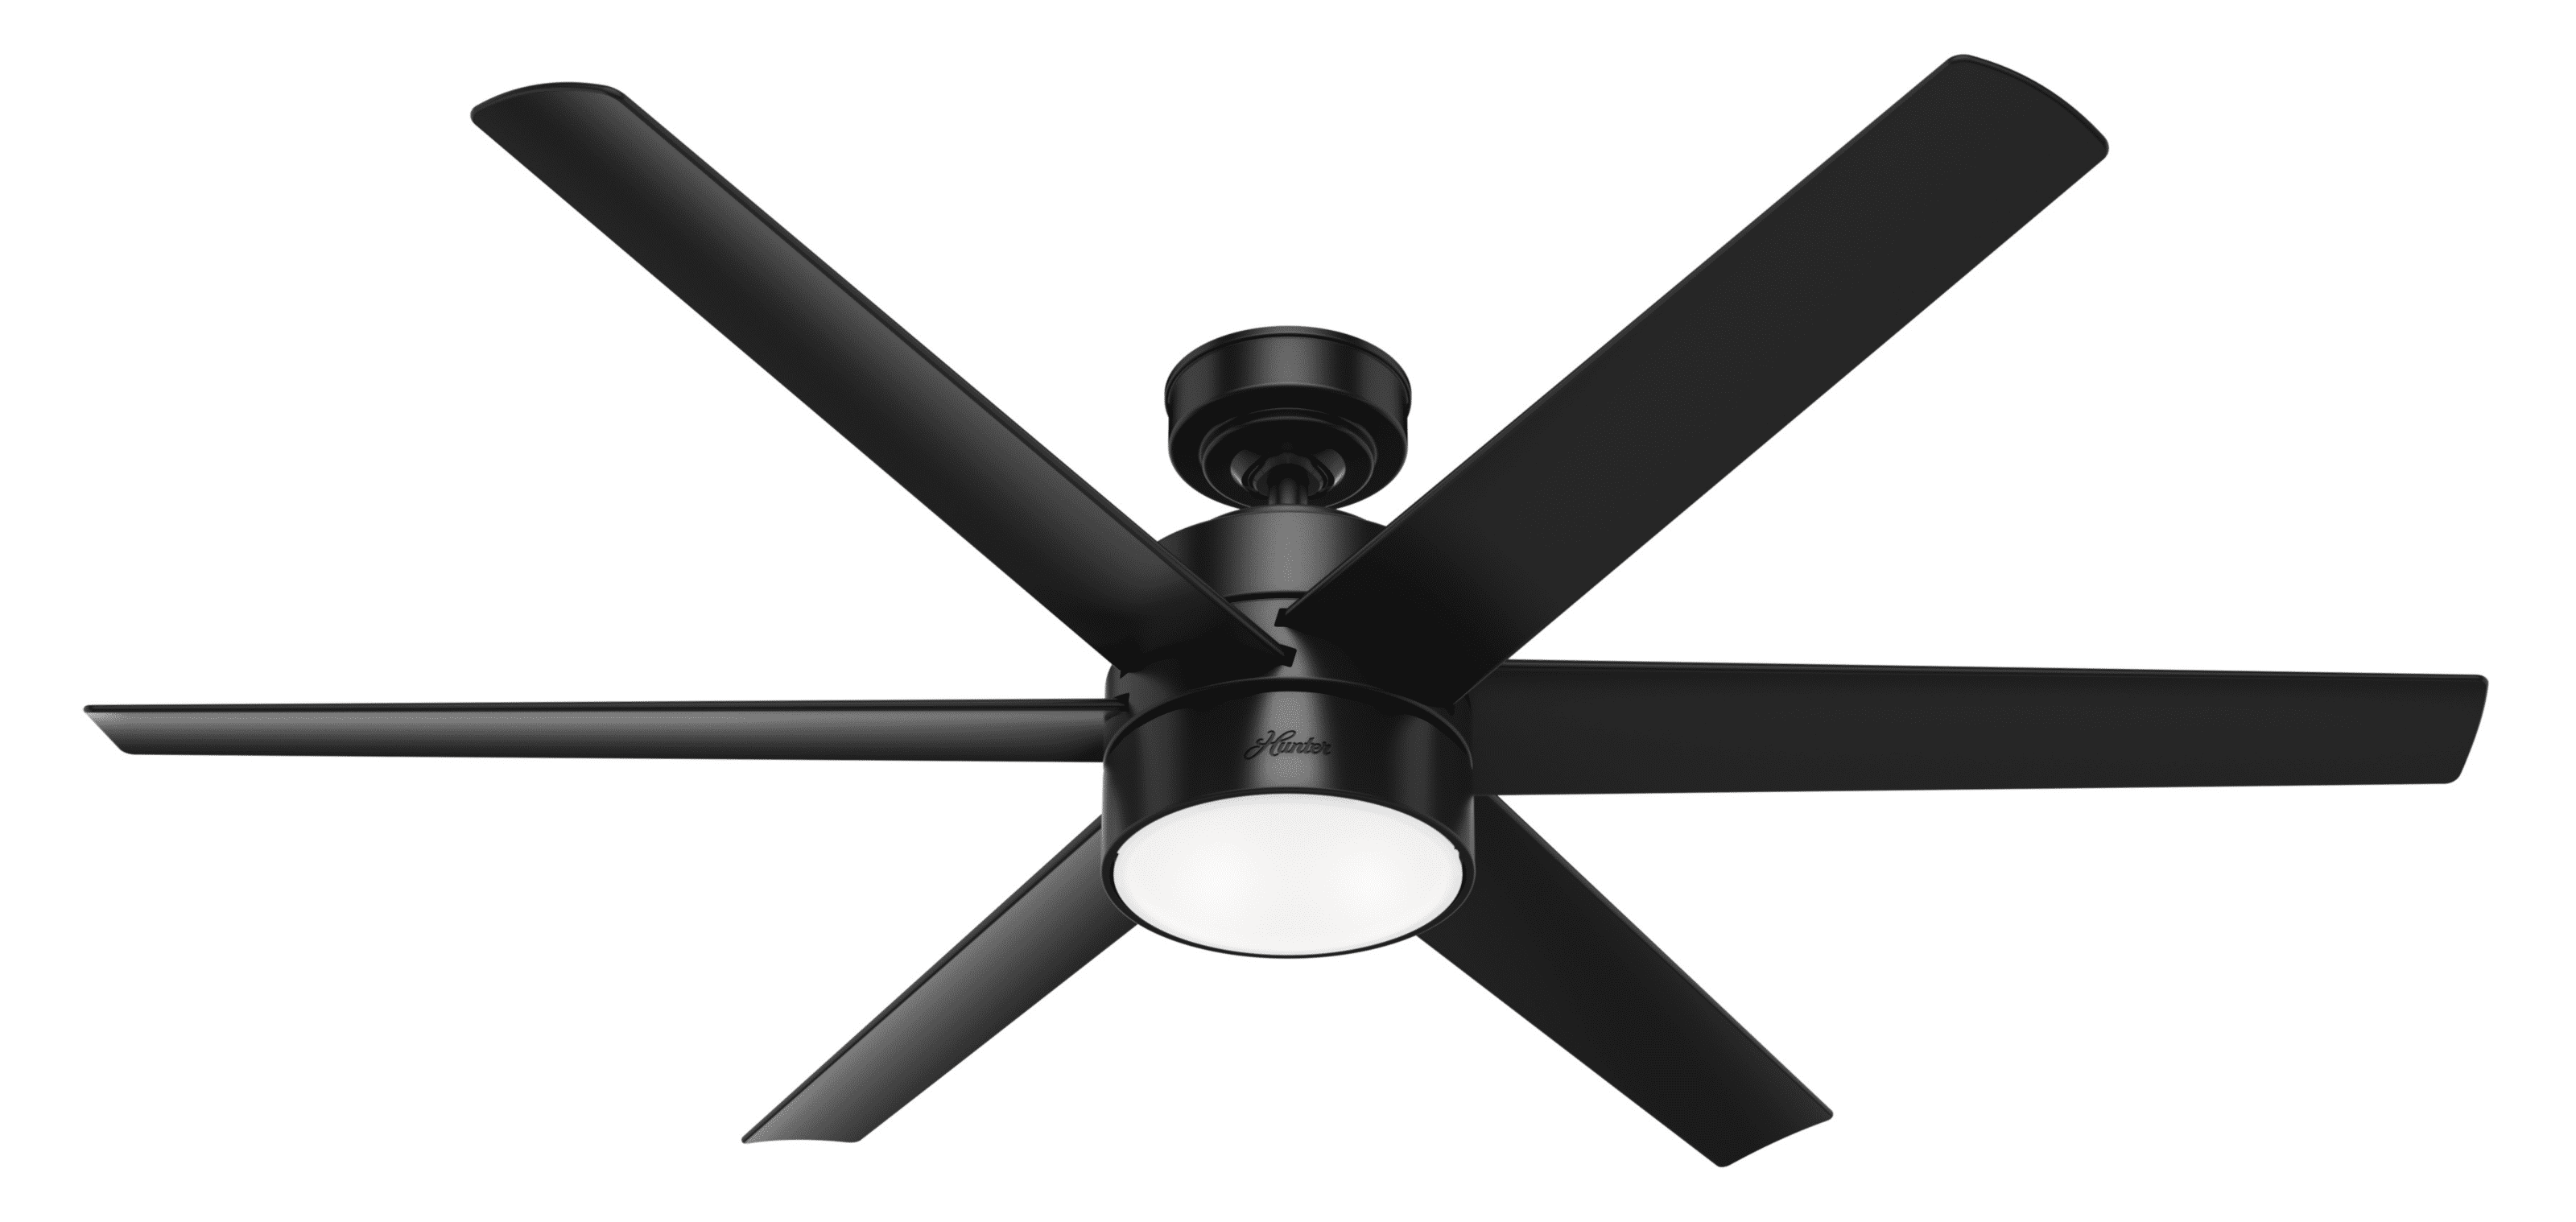 Shop 60in Solaria Ceiling Fan in Matte Black with LED Light Kit from Walmart on Openhaus